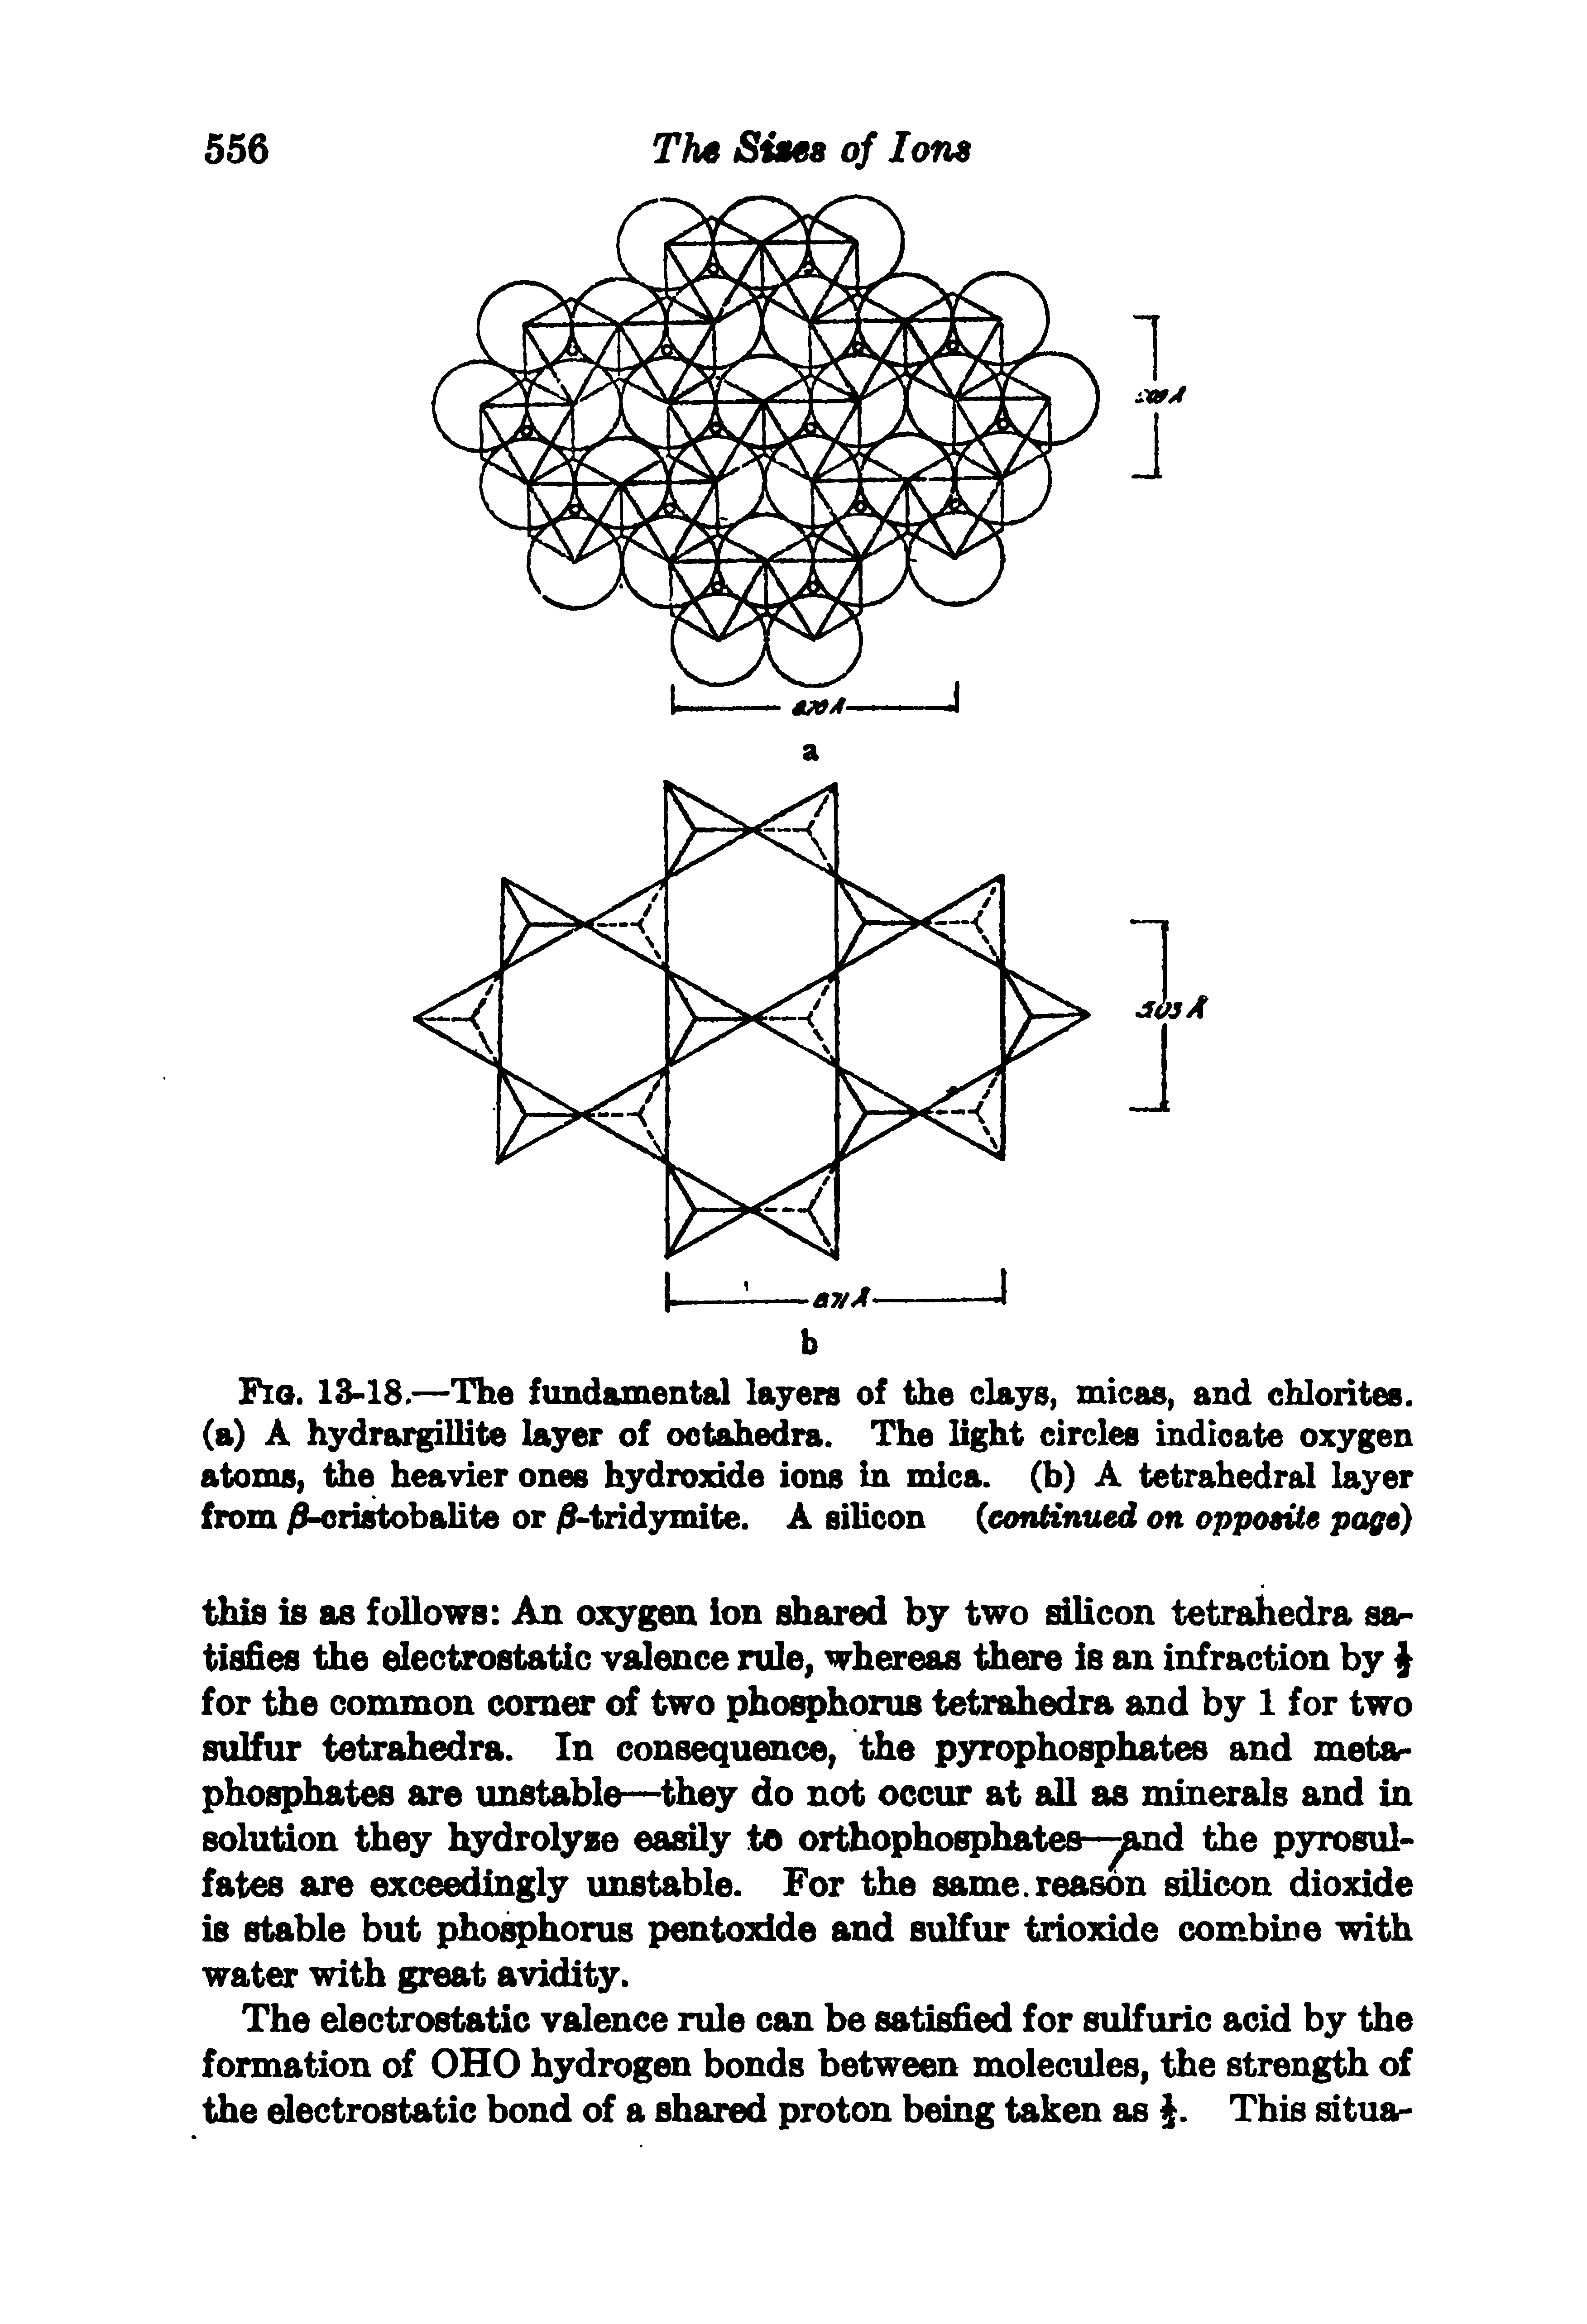 Fig. 13-18.—The fundamental layers of the clays, micas, and chlorites, (a) A hydrargillite layer of ootahedra. The light circles indicate oxygen atoms, the heavier ones hydroxide ions in mica, (b) A tetrahedral layer from /9-eristobalite or / -tridymite. A silicon (continued on opposite page)...